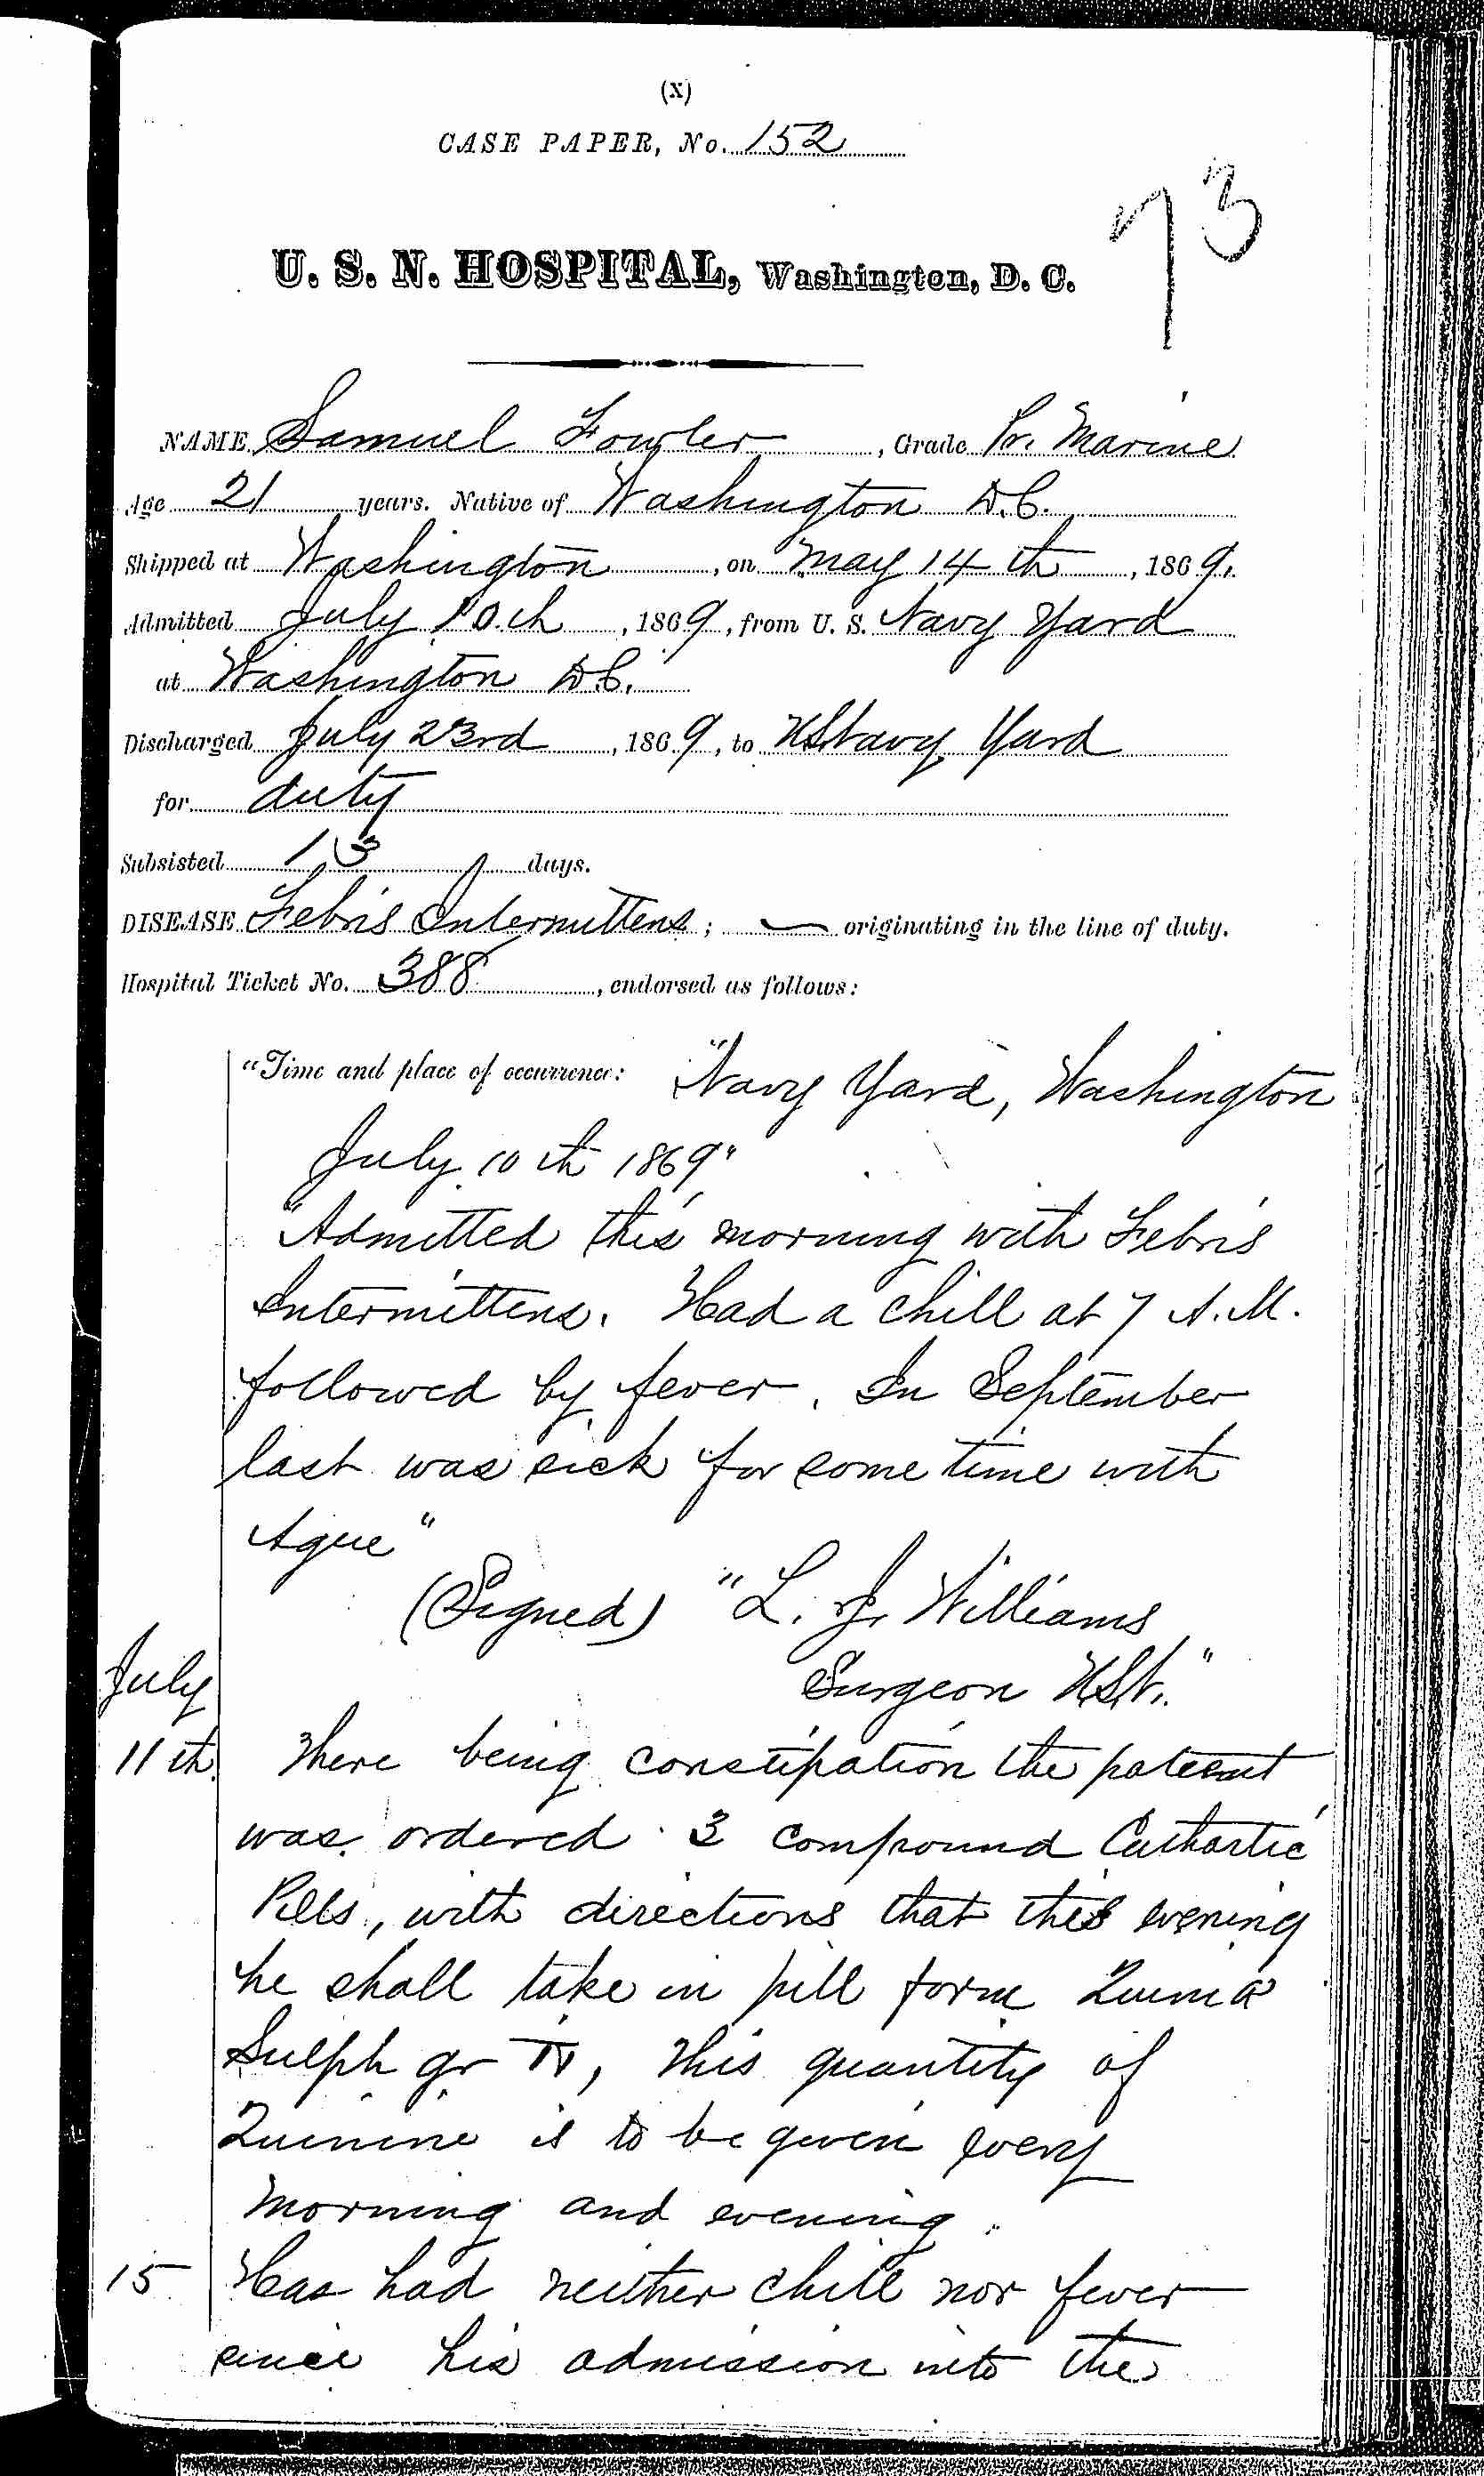 Entry for Samuel Fowler (page 1 of 2) in the log Hospital Tickets and Case Papers - Naval Hospital - Washington, D.C. - 1868-69